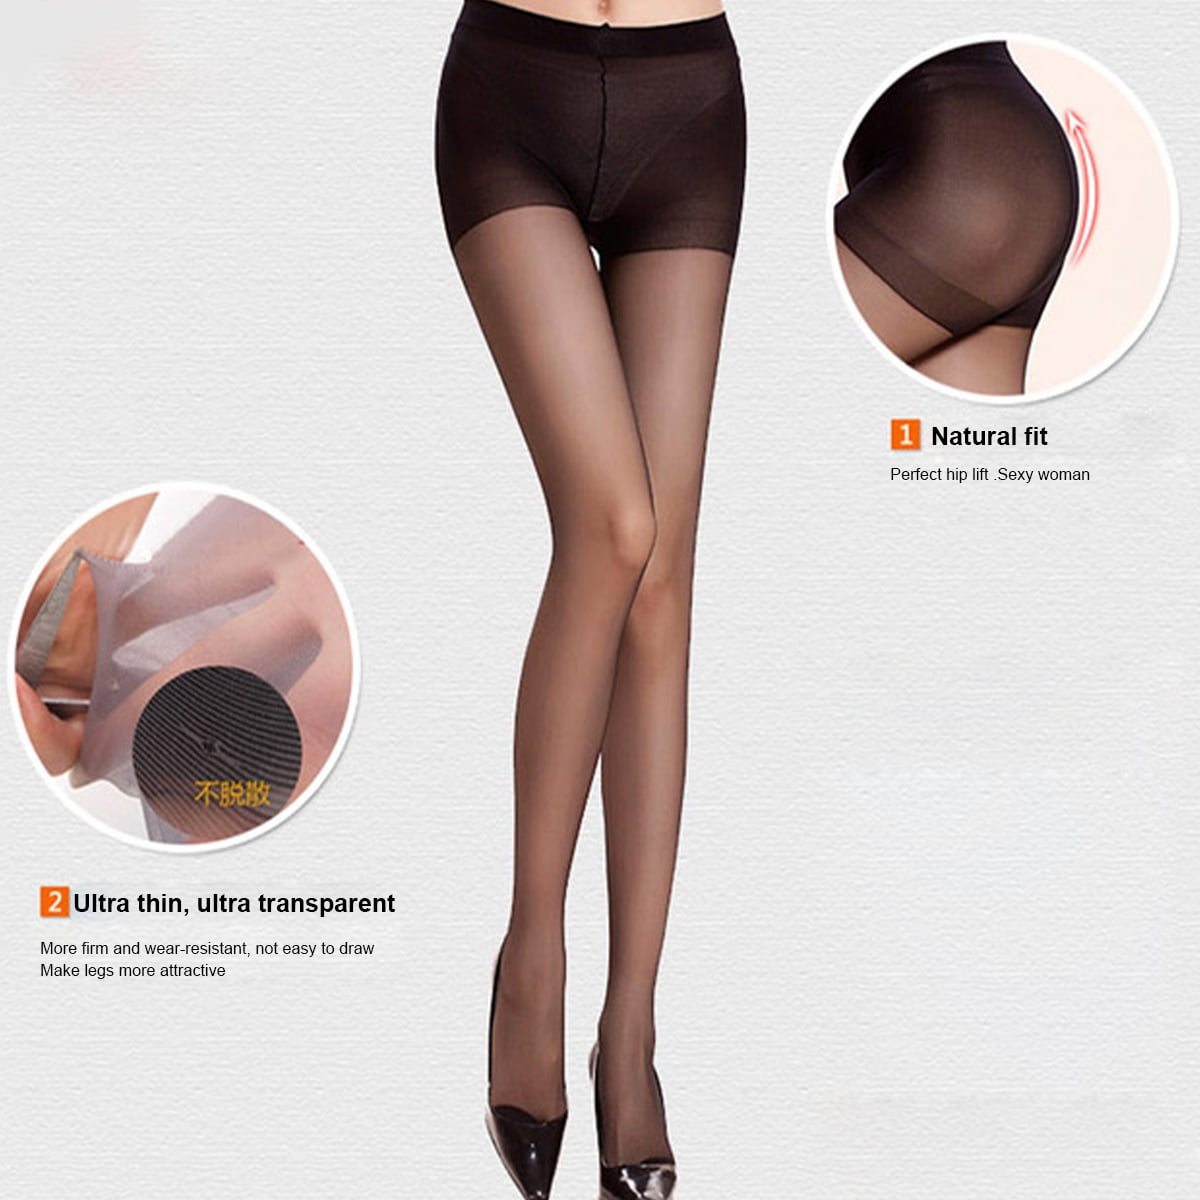 Supplement Stræbe Comorama Black Stockings Various Patterns Passionate Mysterious High Waist Cosplay  Prop Fancy Dress Tights Sweet Gift Panty-hose 6004 Free Size | Walmart  Canada